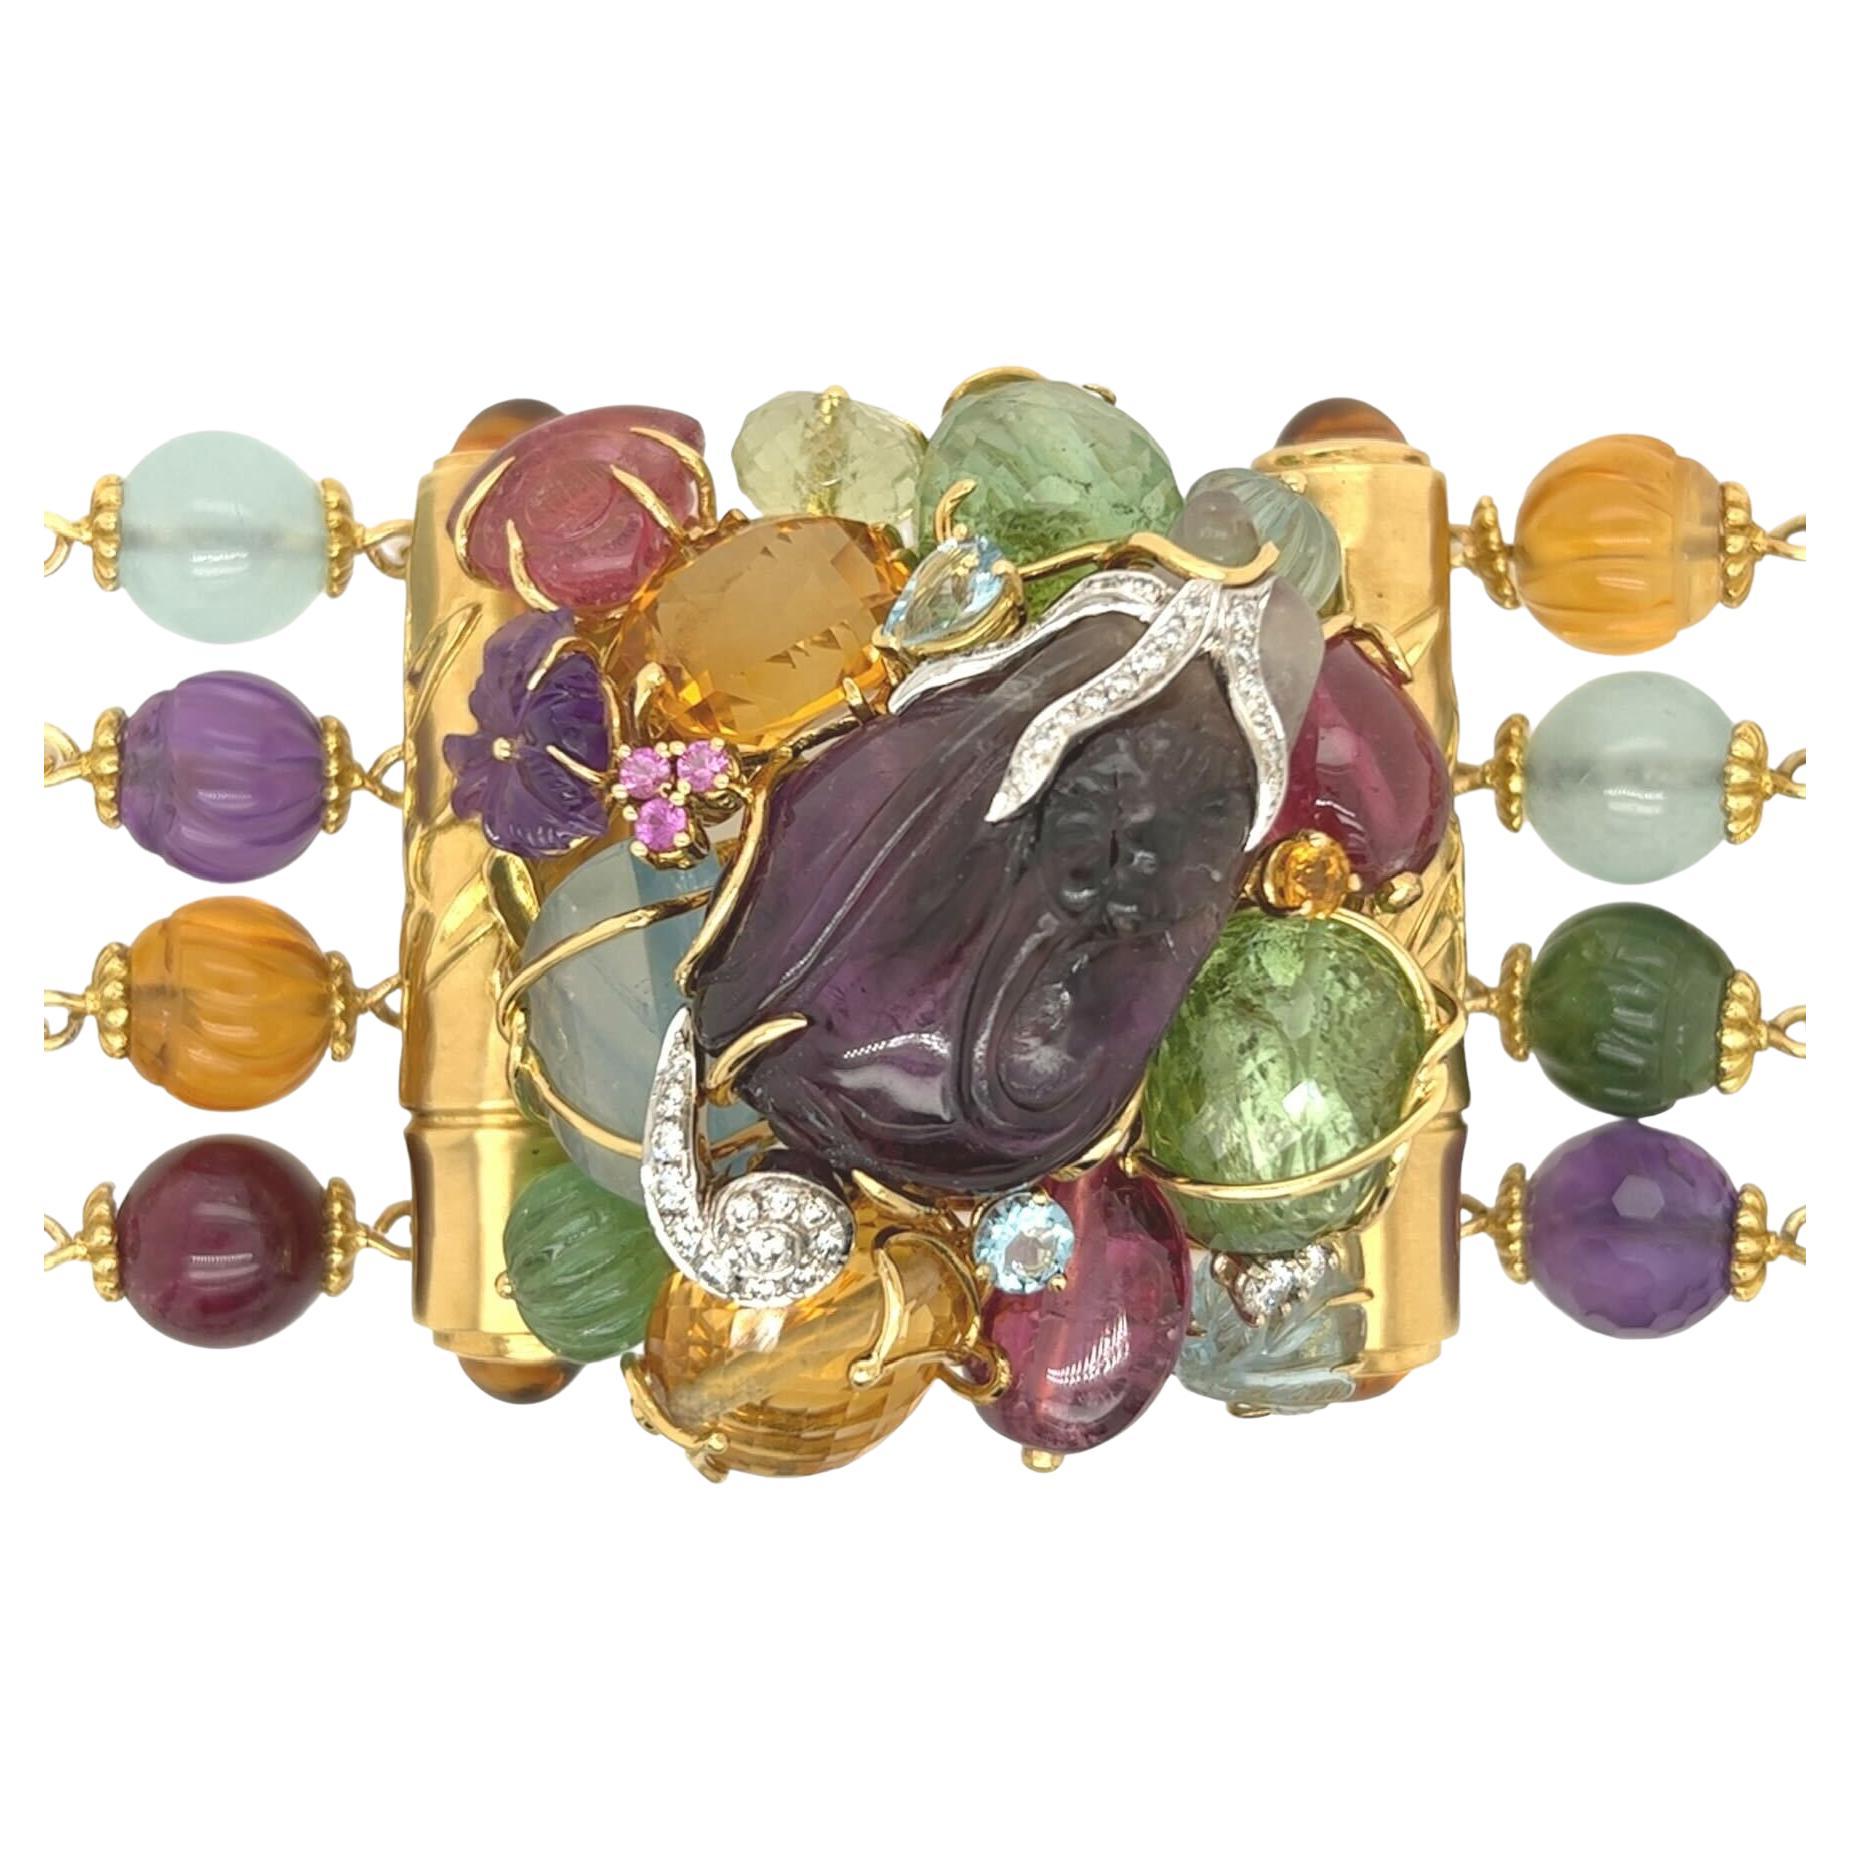 An 18 karat yellow gold, amethyst, green tourmaline, pink tourmaline, aquamarine, citrine and diamond bracelet, Seaman Schepps, circa 1990s.  Fashioned as four rows of carved multi gem beads with spacers of bamboo design with a central motif of